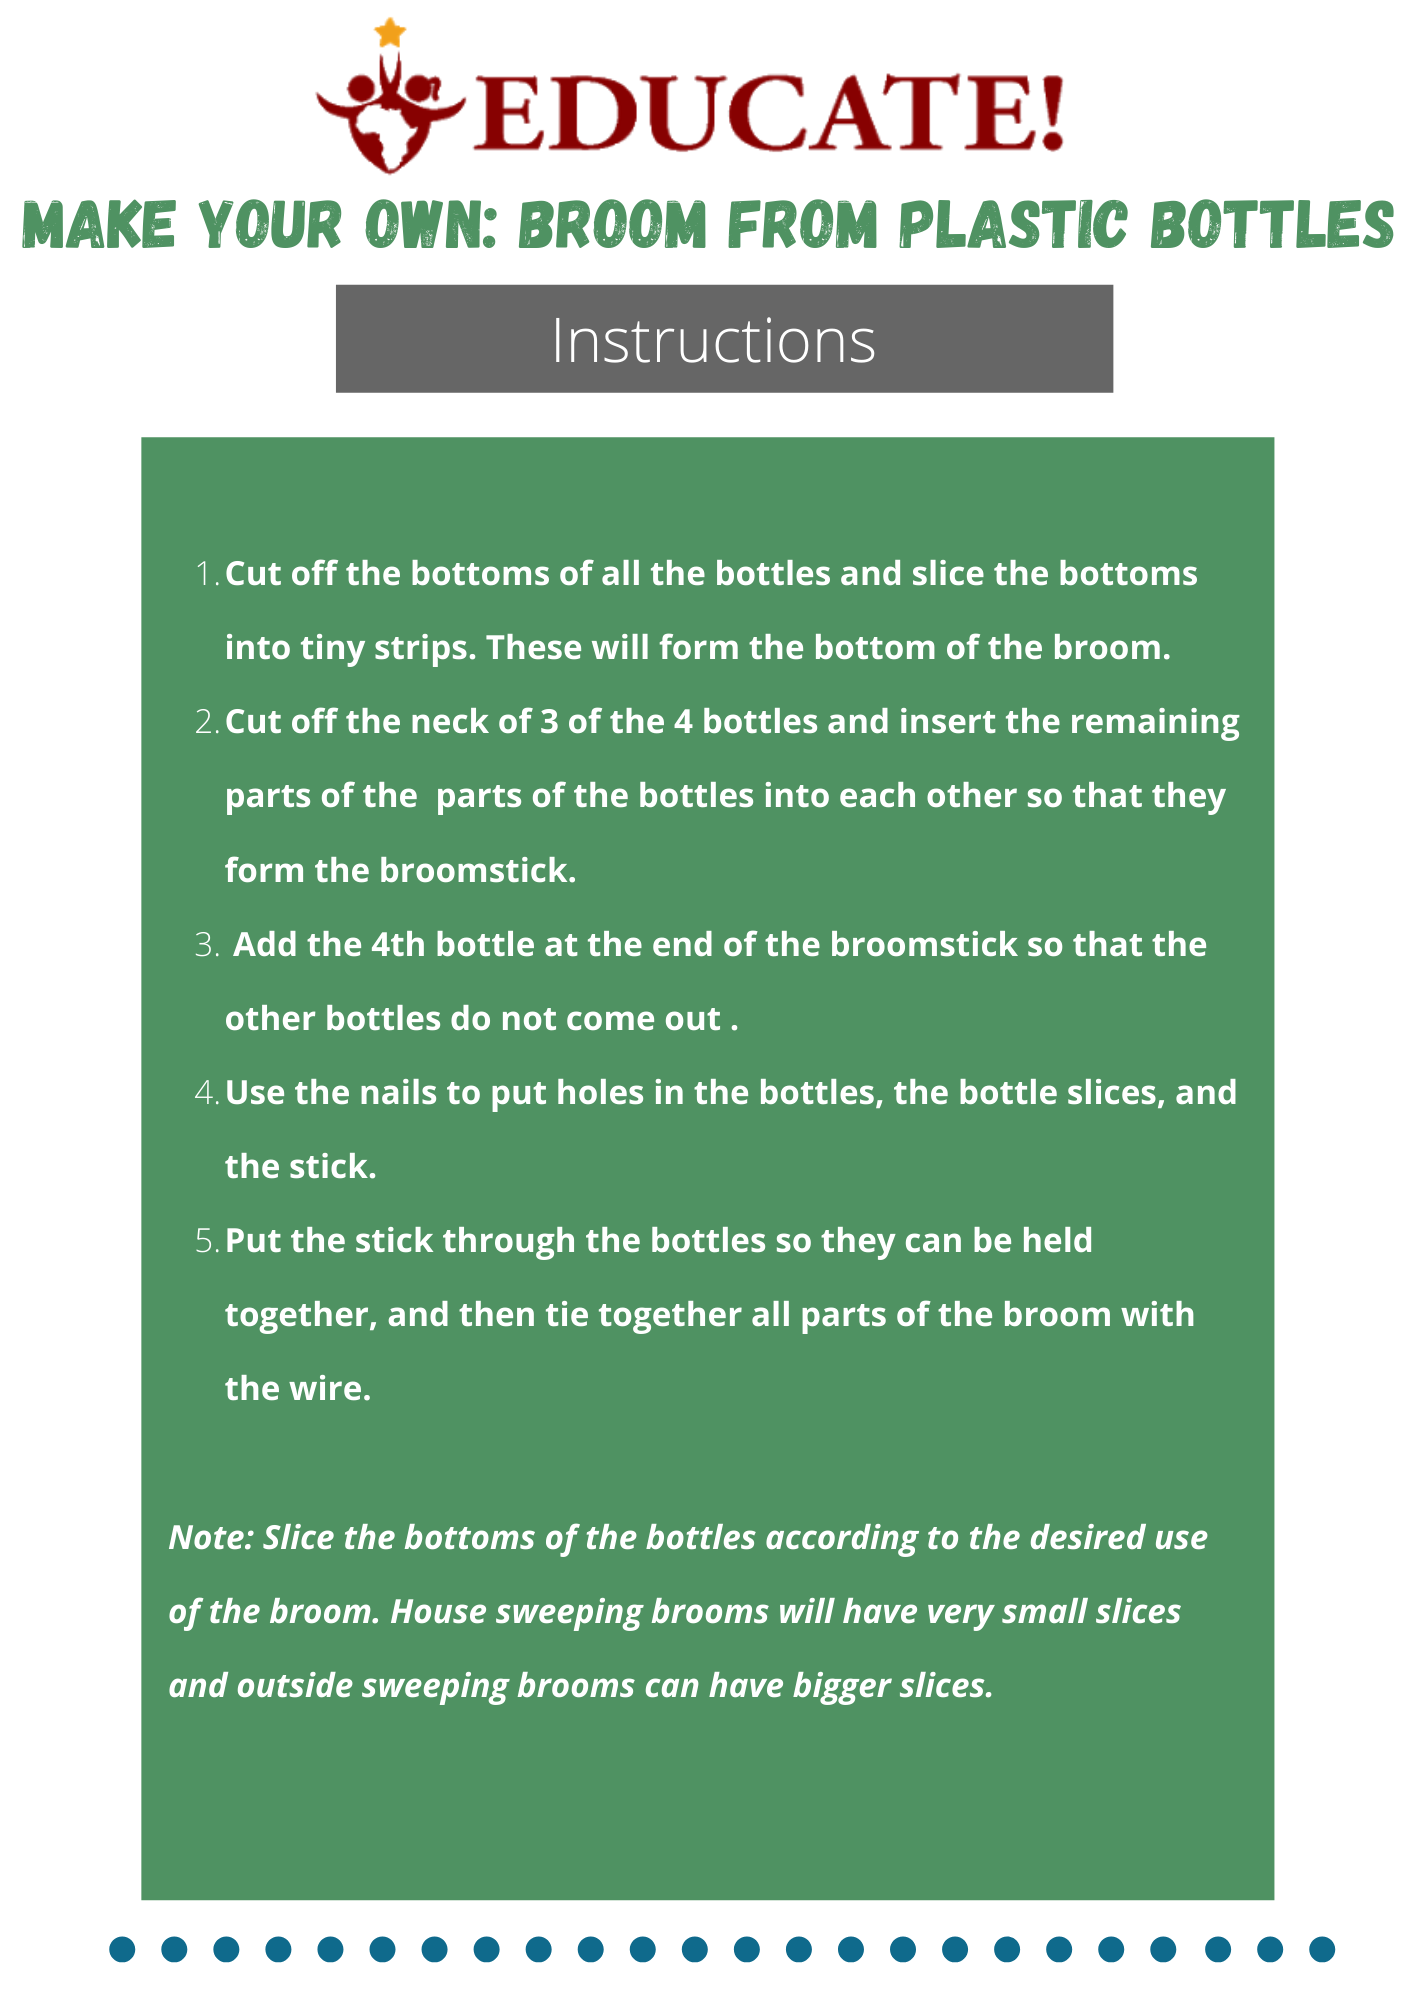 Broom Instructions.png